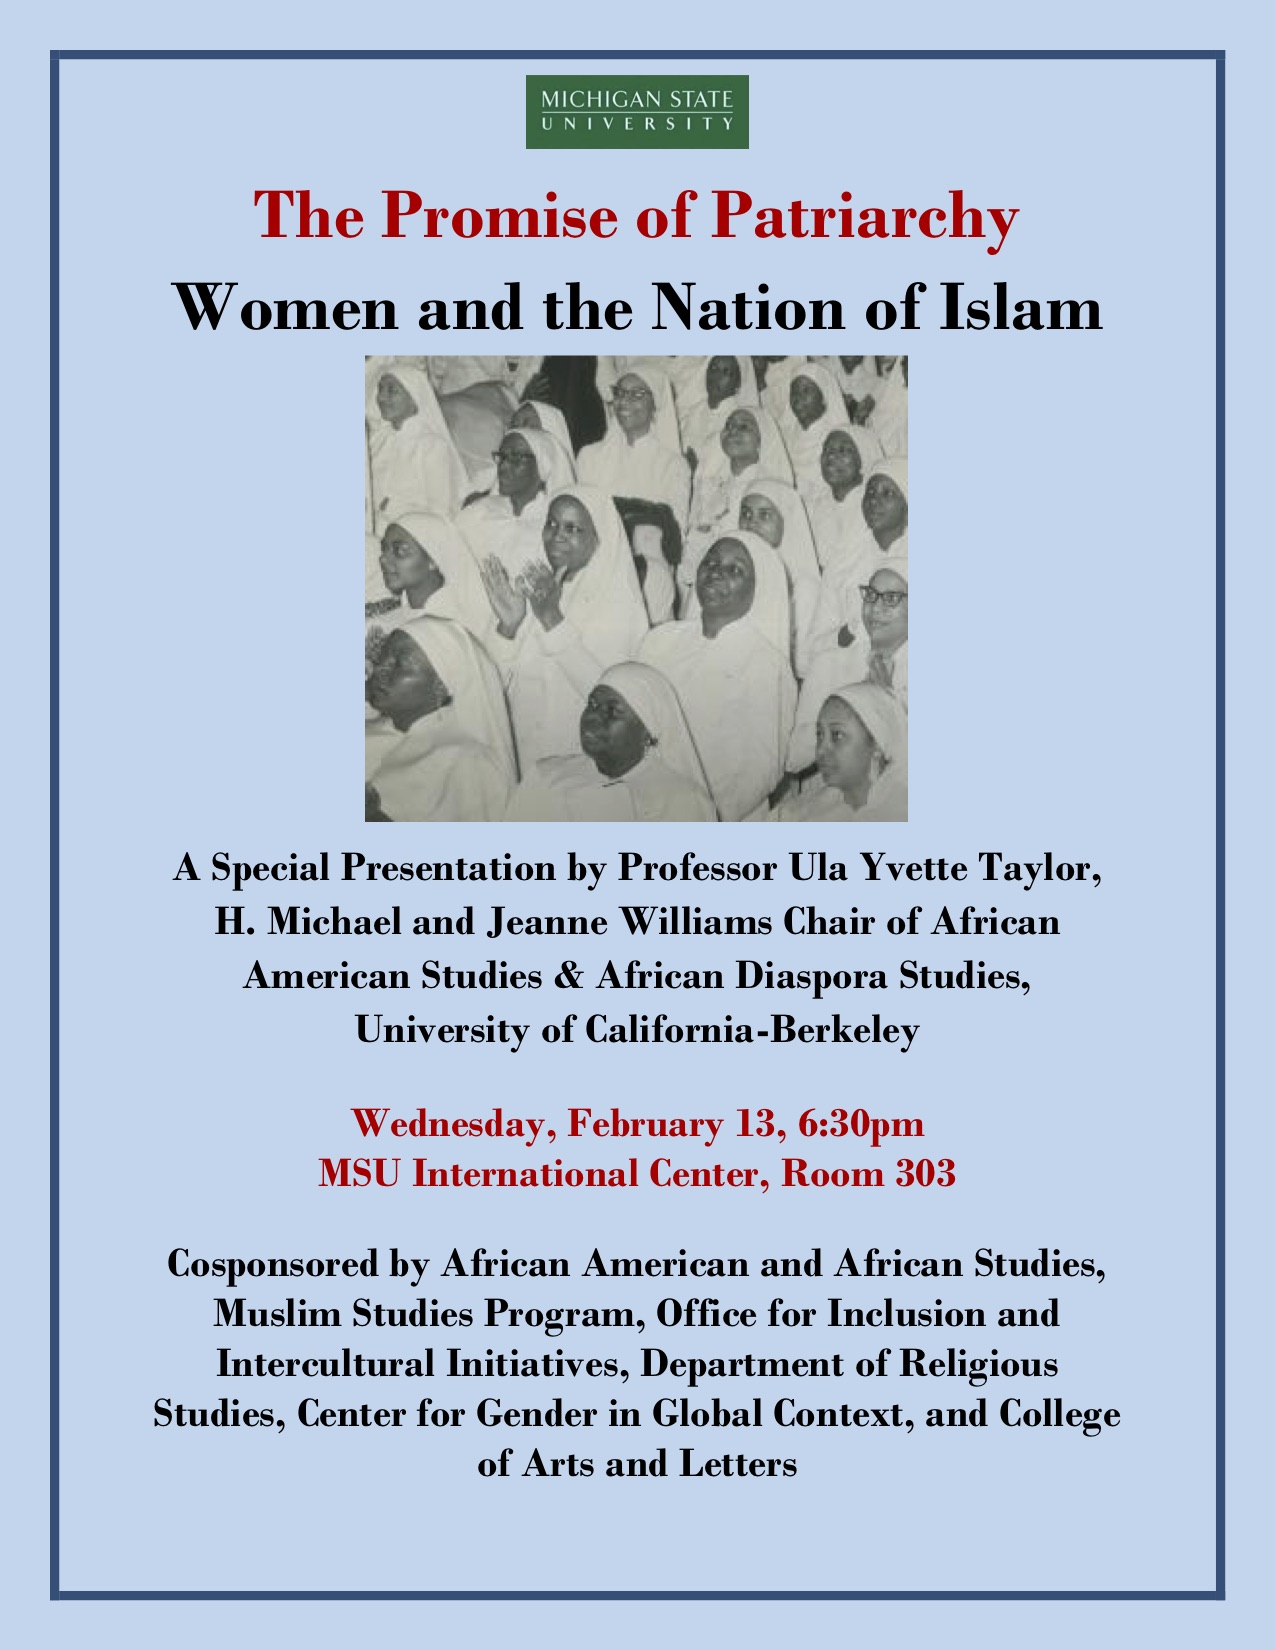 The Promise of Patriarchy: Women and the Nation of Islam @ MSU International Center, Room 303 | East Lansing | Michigan | United States